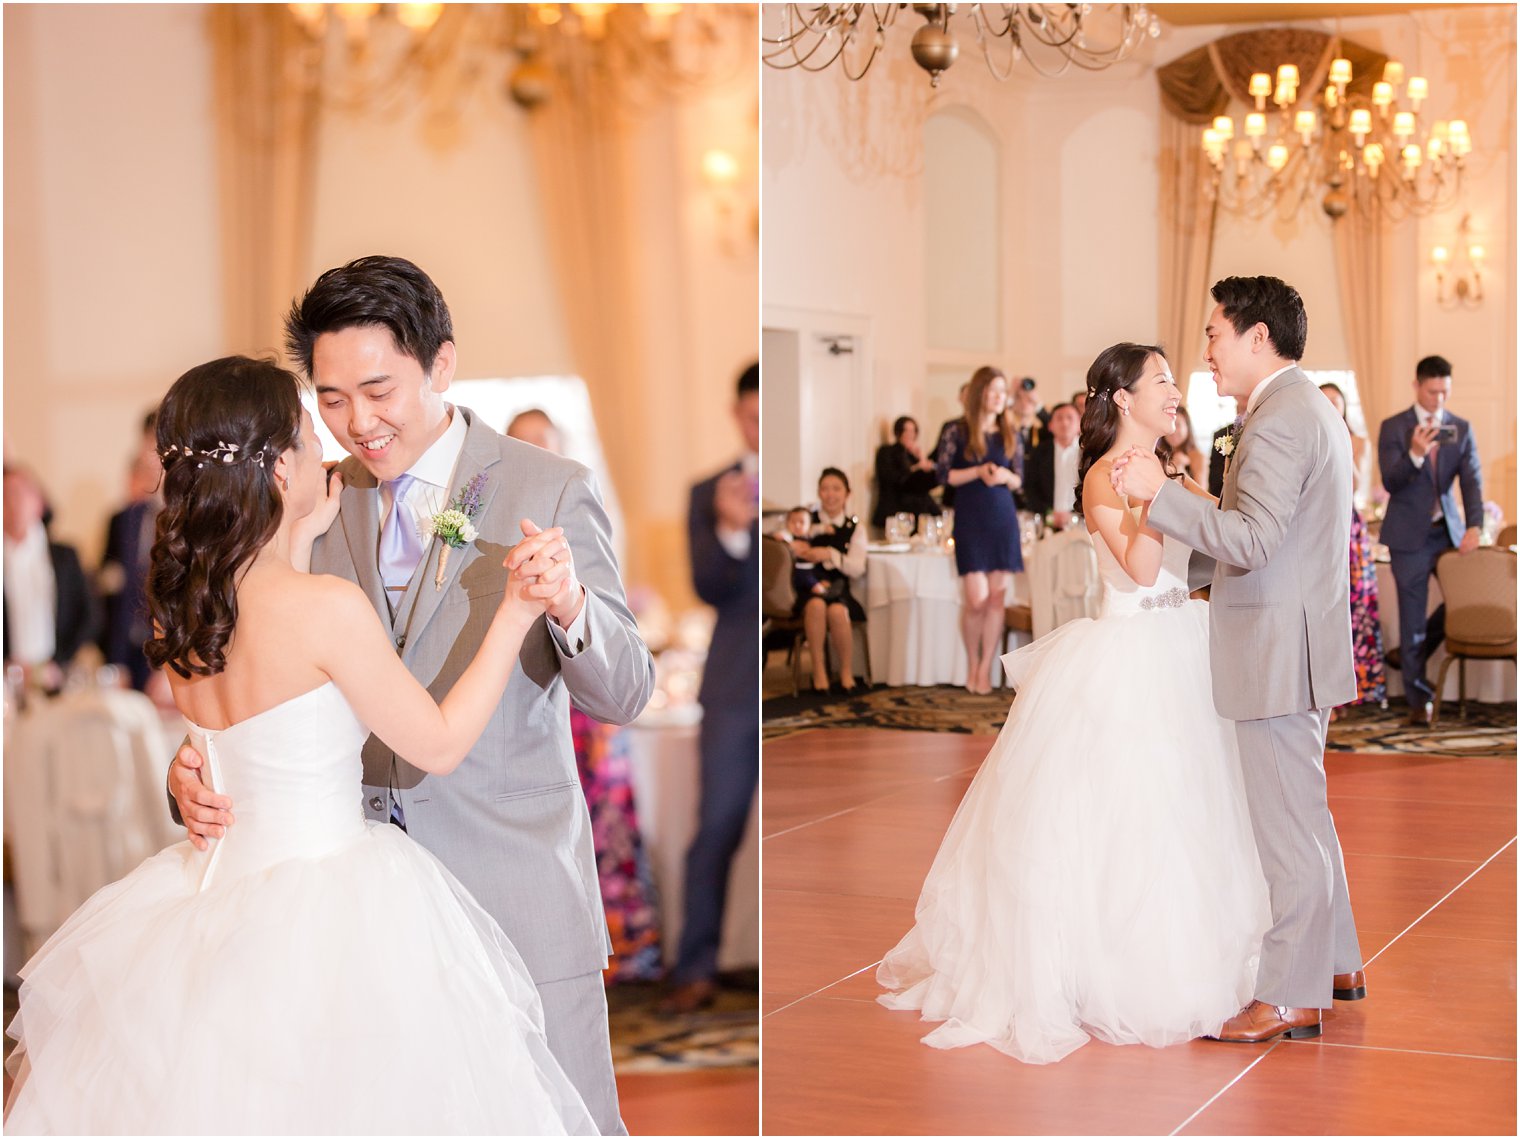 Bride and groom's first dance | Wedding reception at Crystal Springs Resort